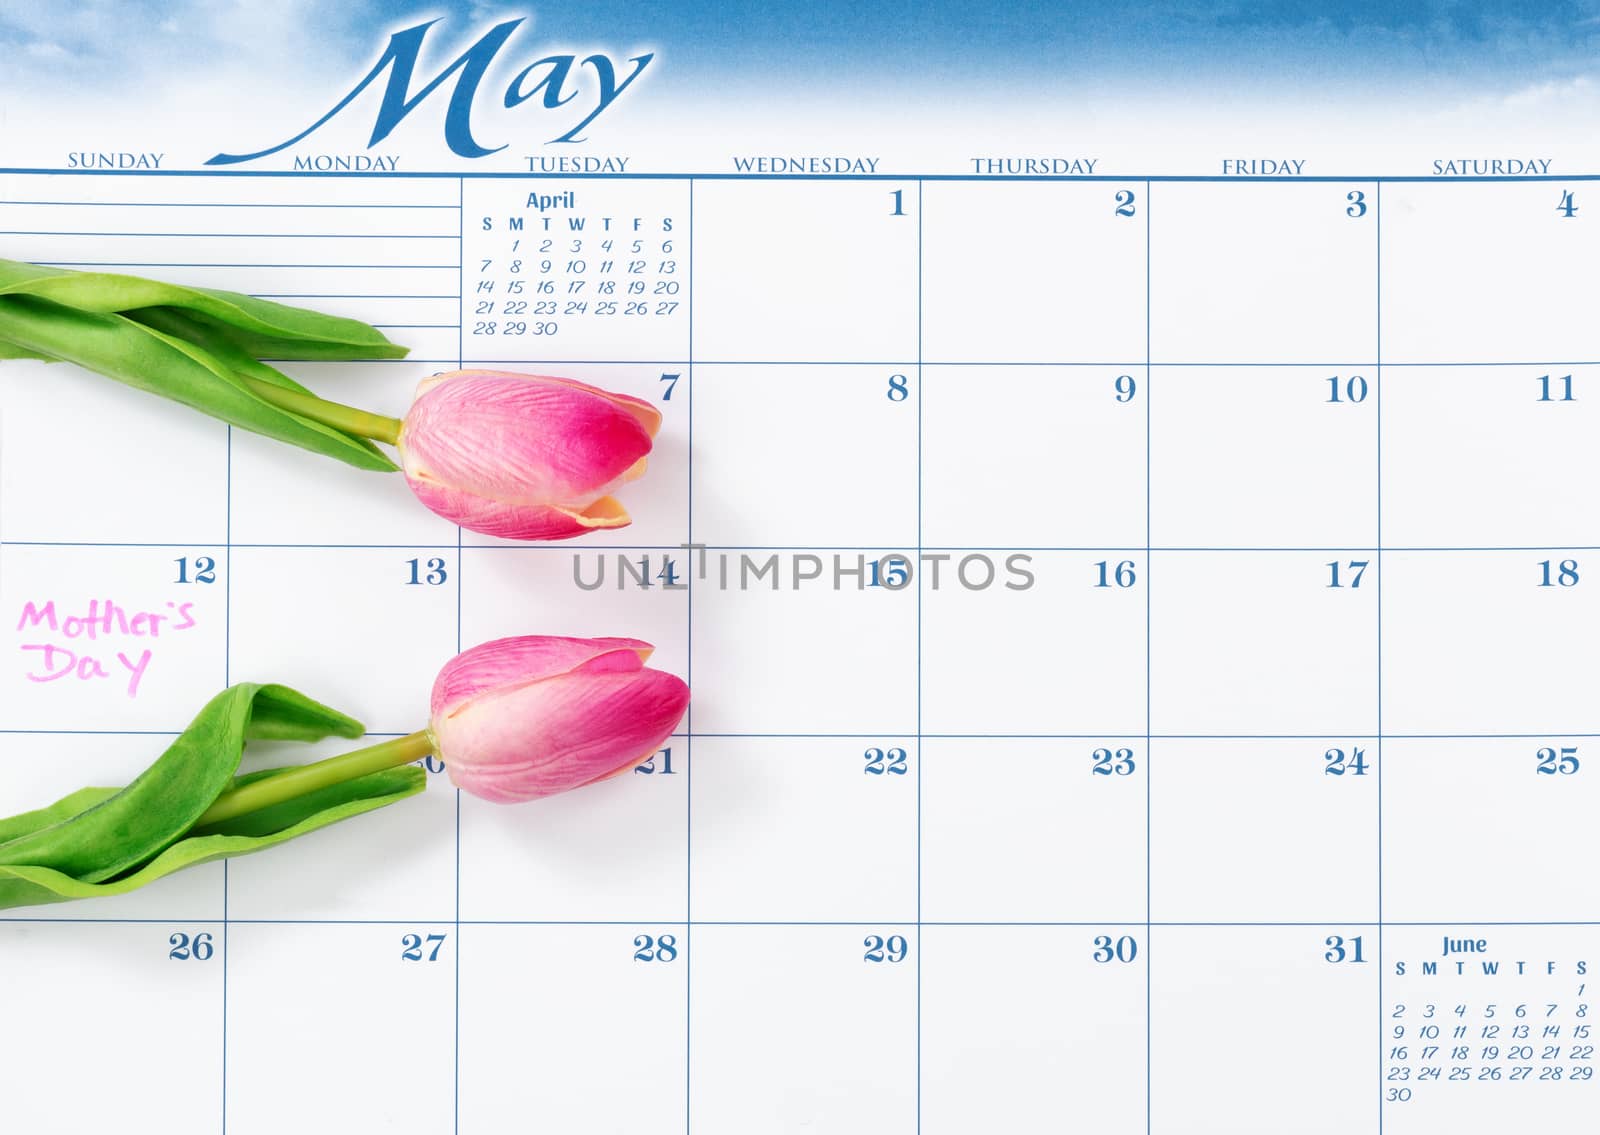 Mothers Day holiday marked on calendar with pink tulips   